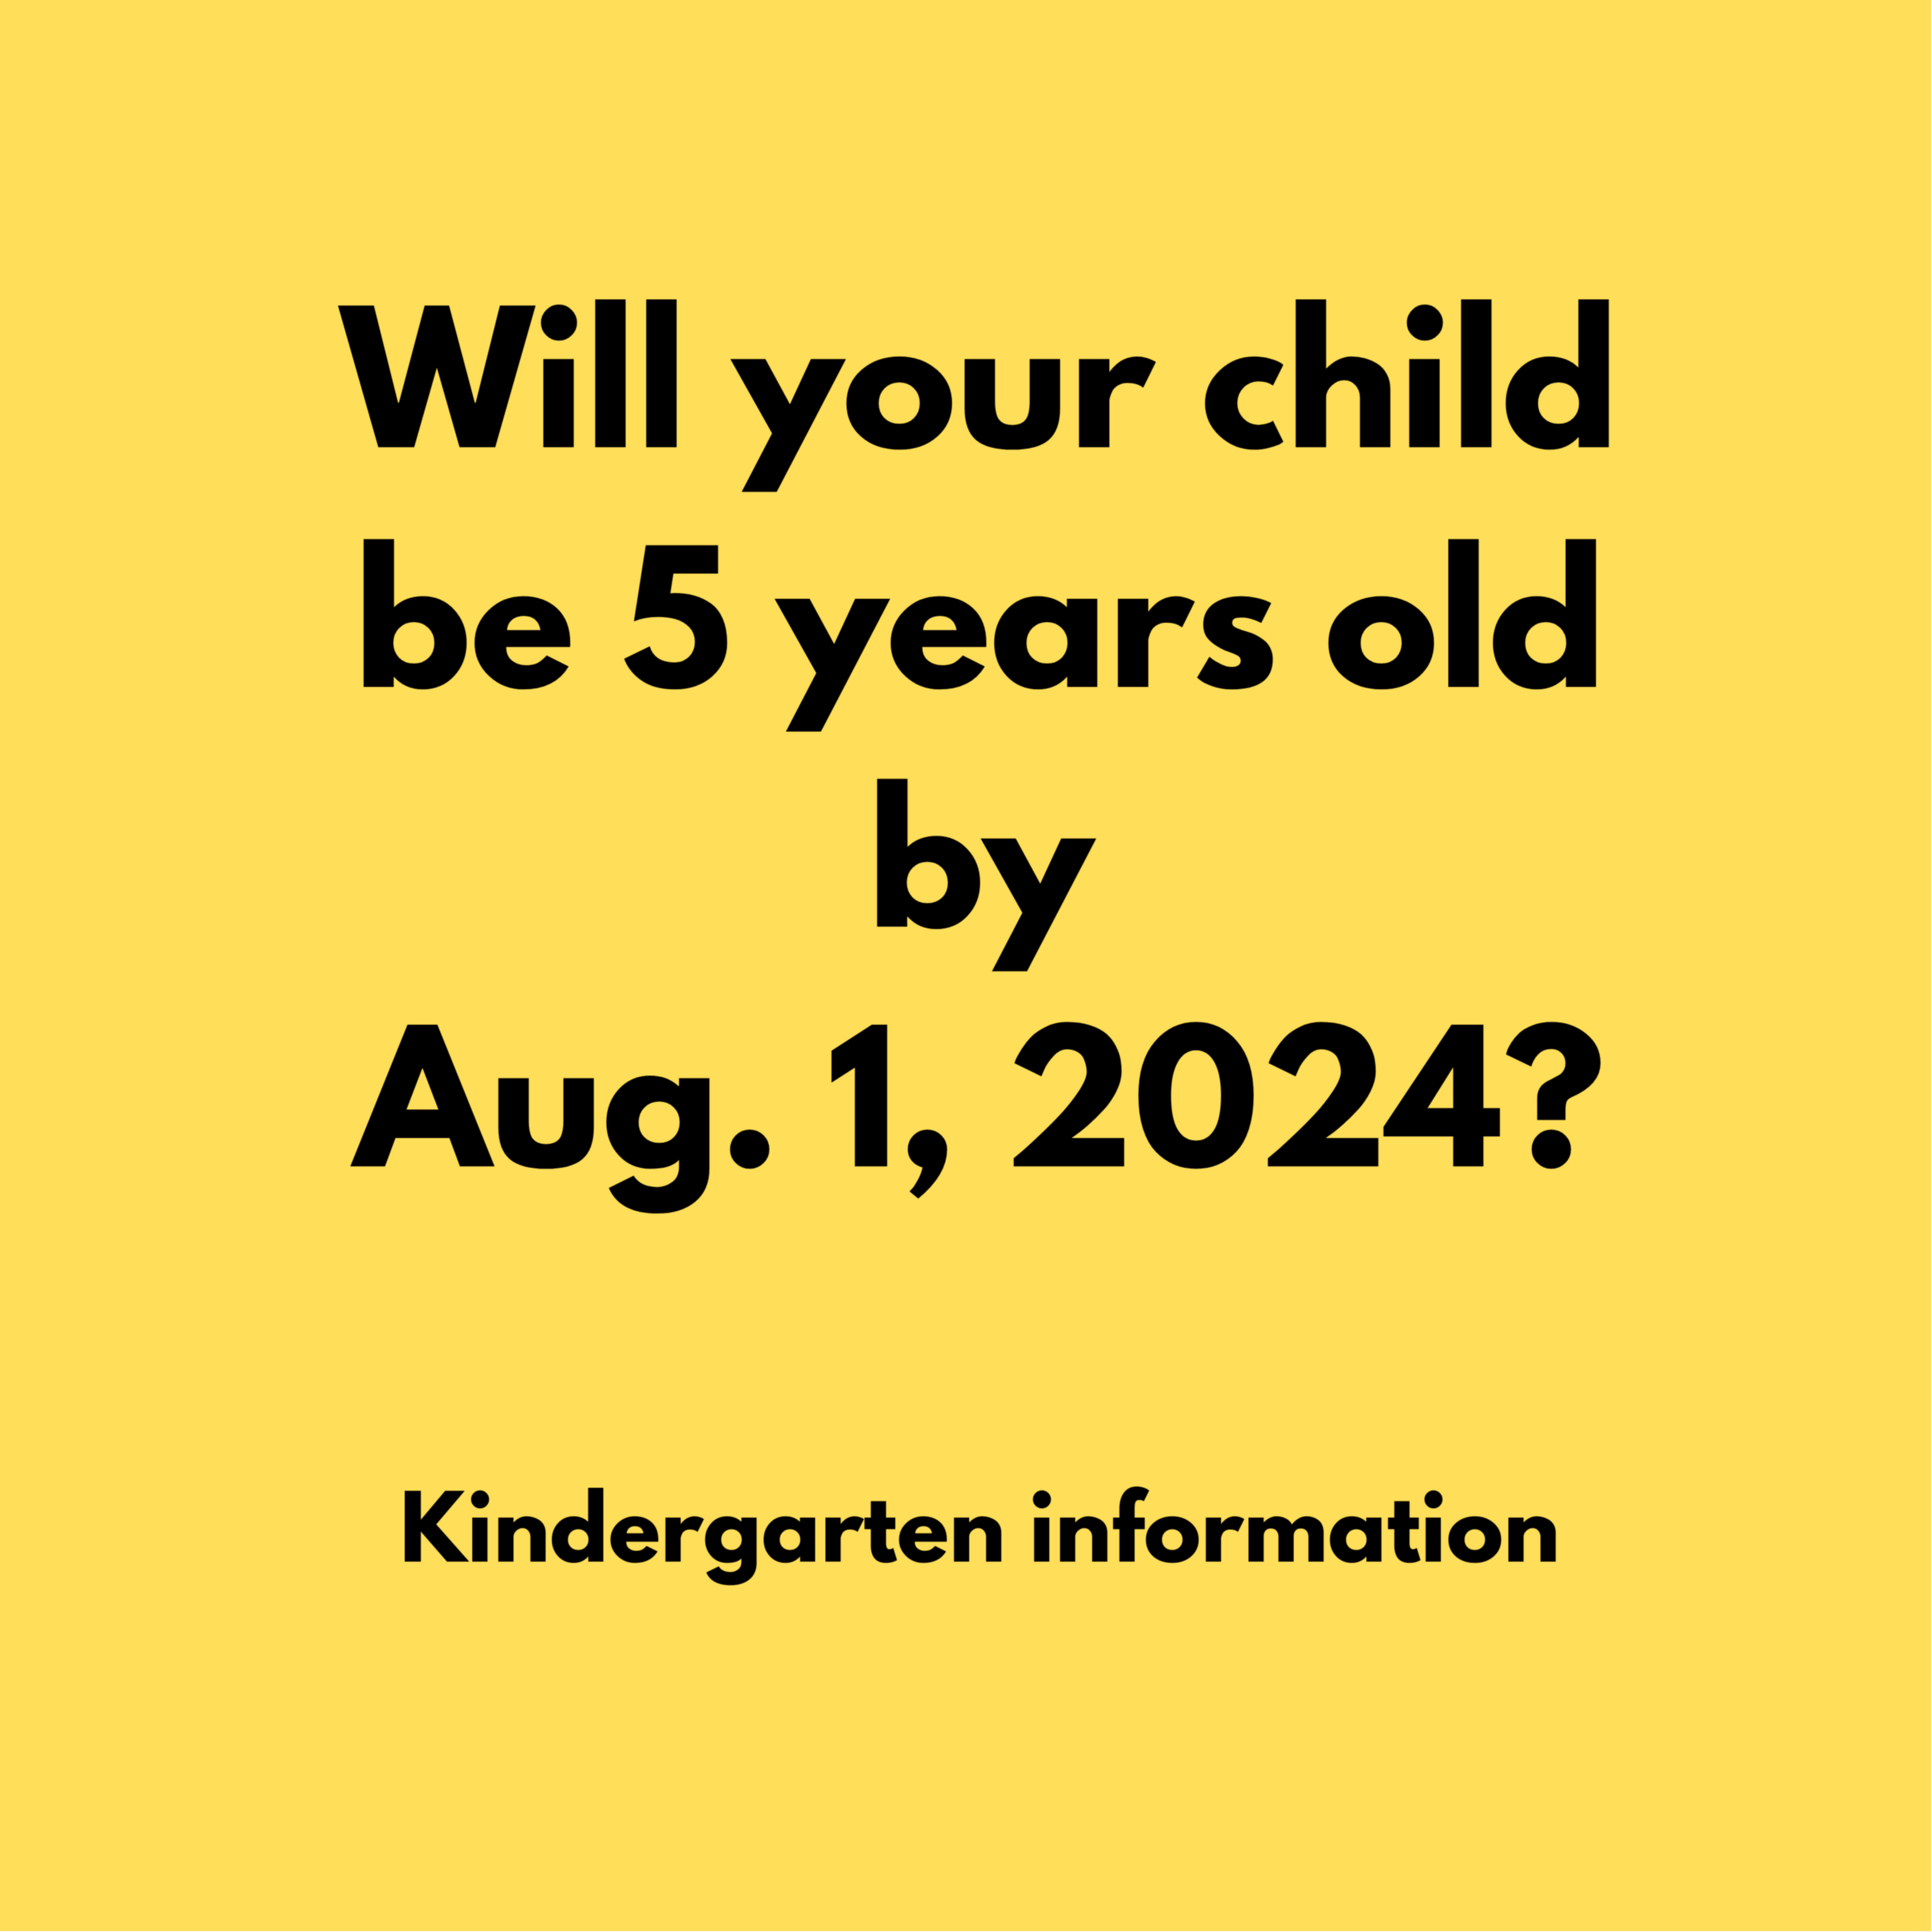 Will your child be 5 years old Aug. 1, 2022?